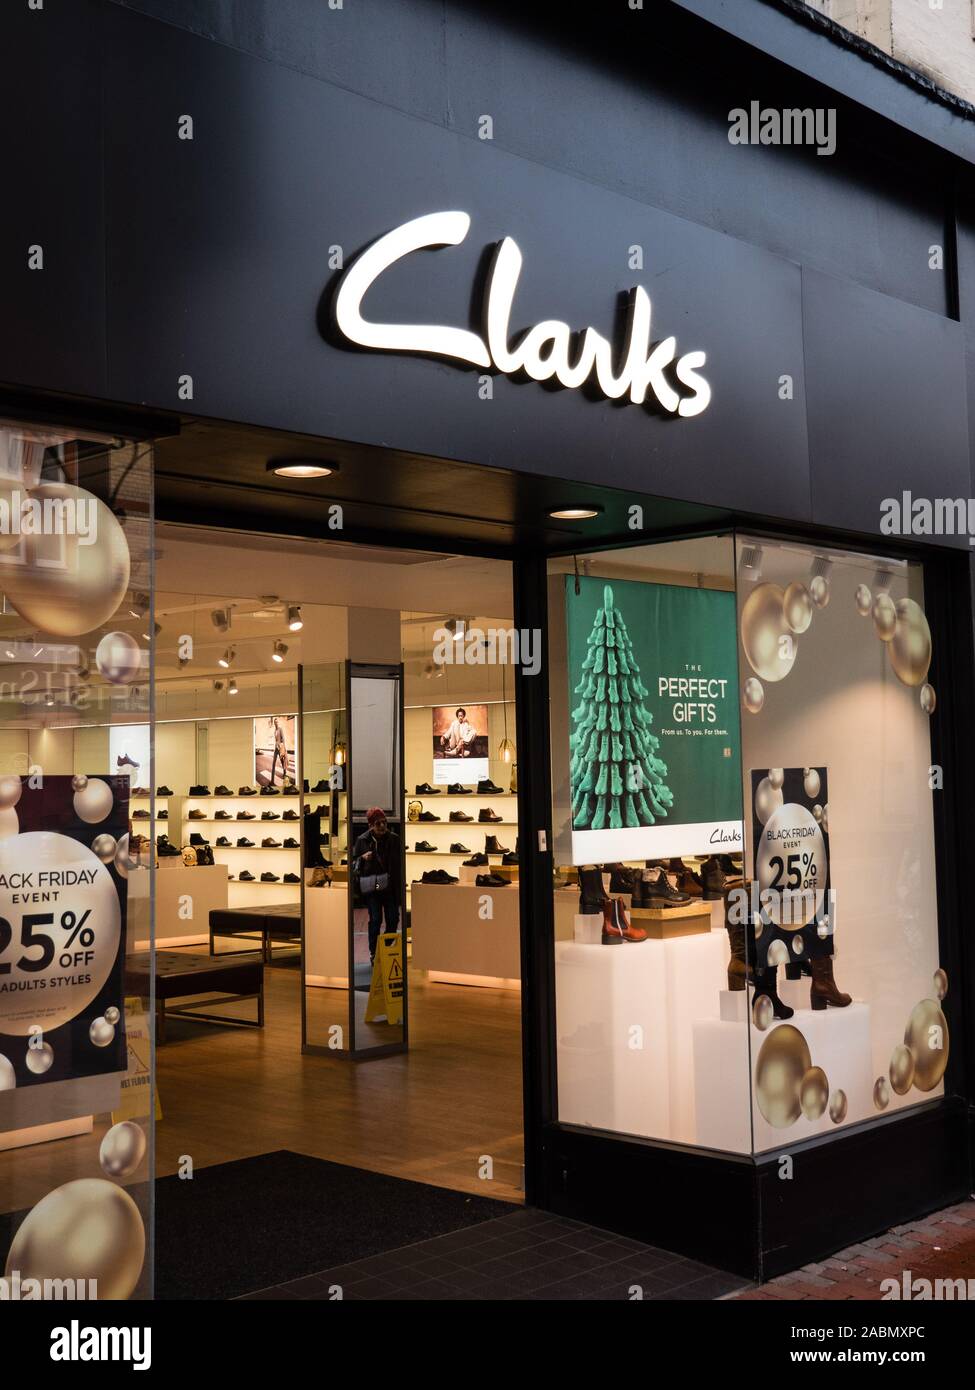 clarks shoe stores near my location